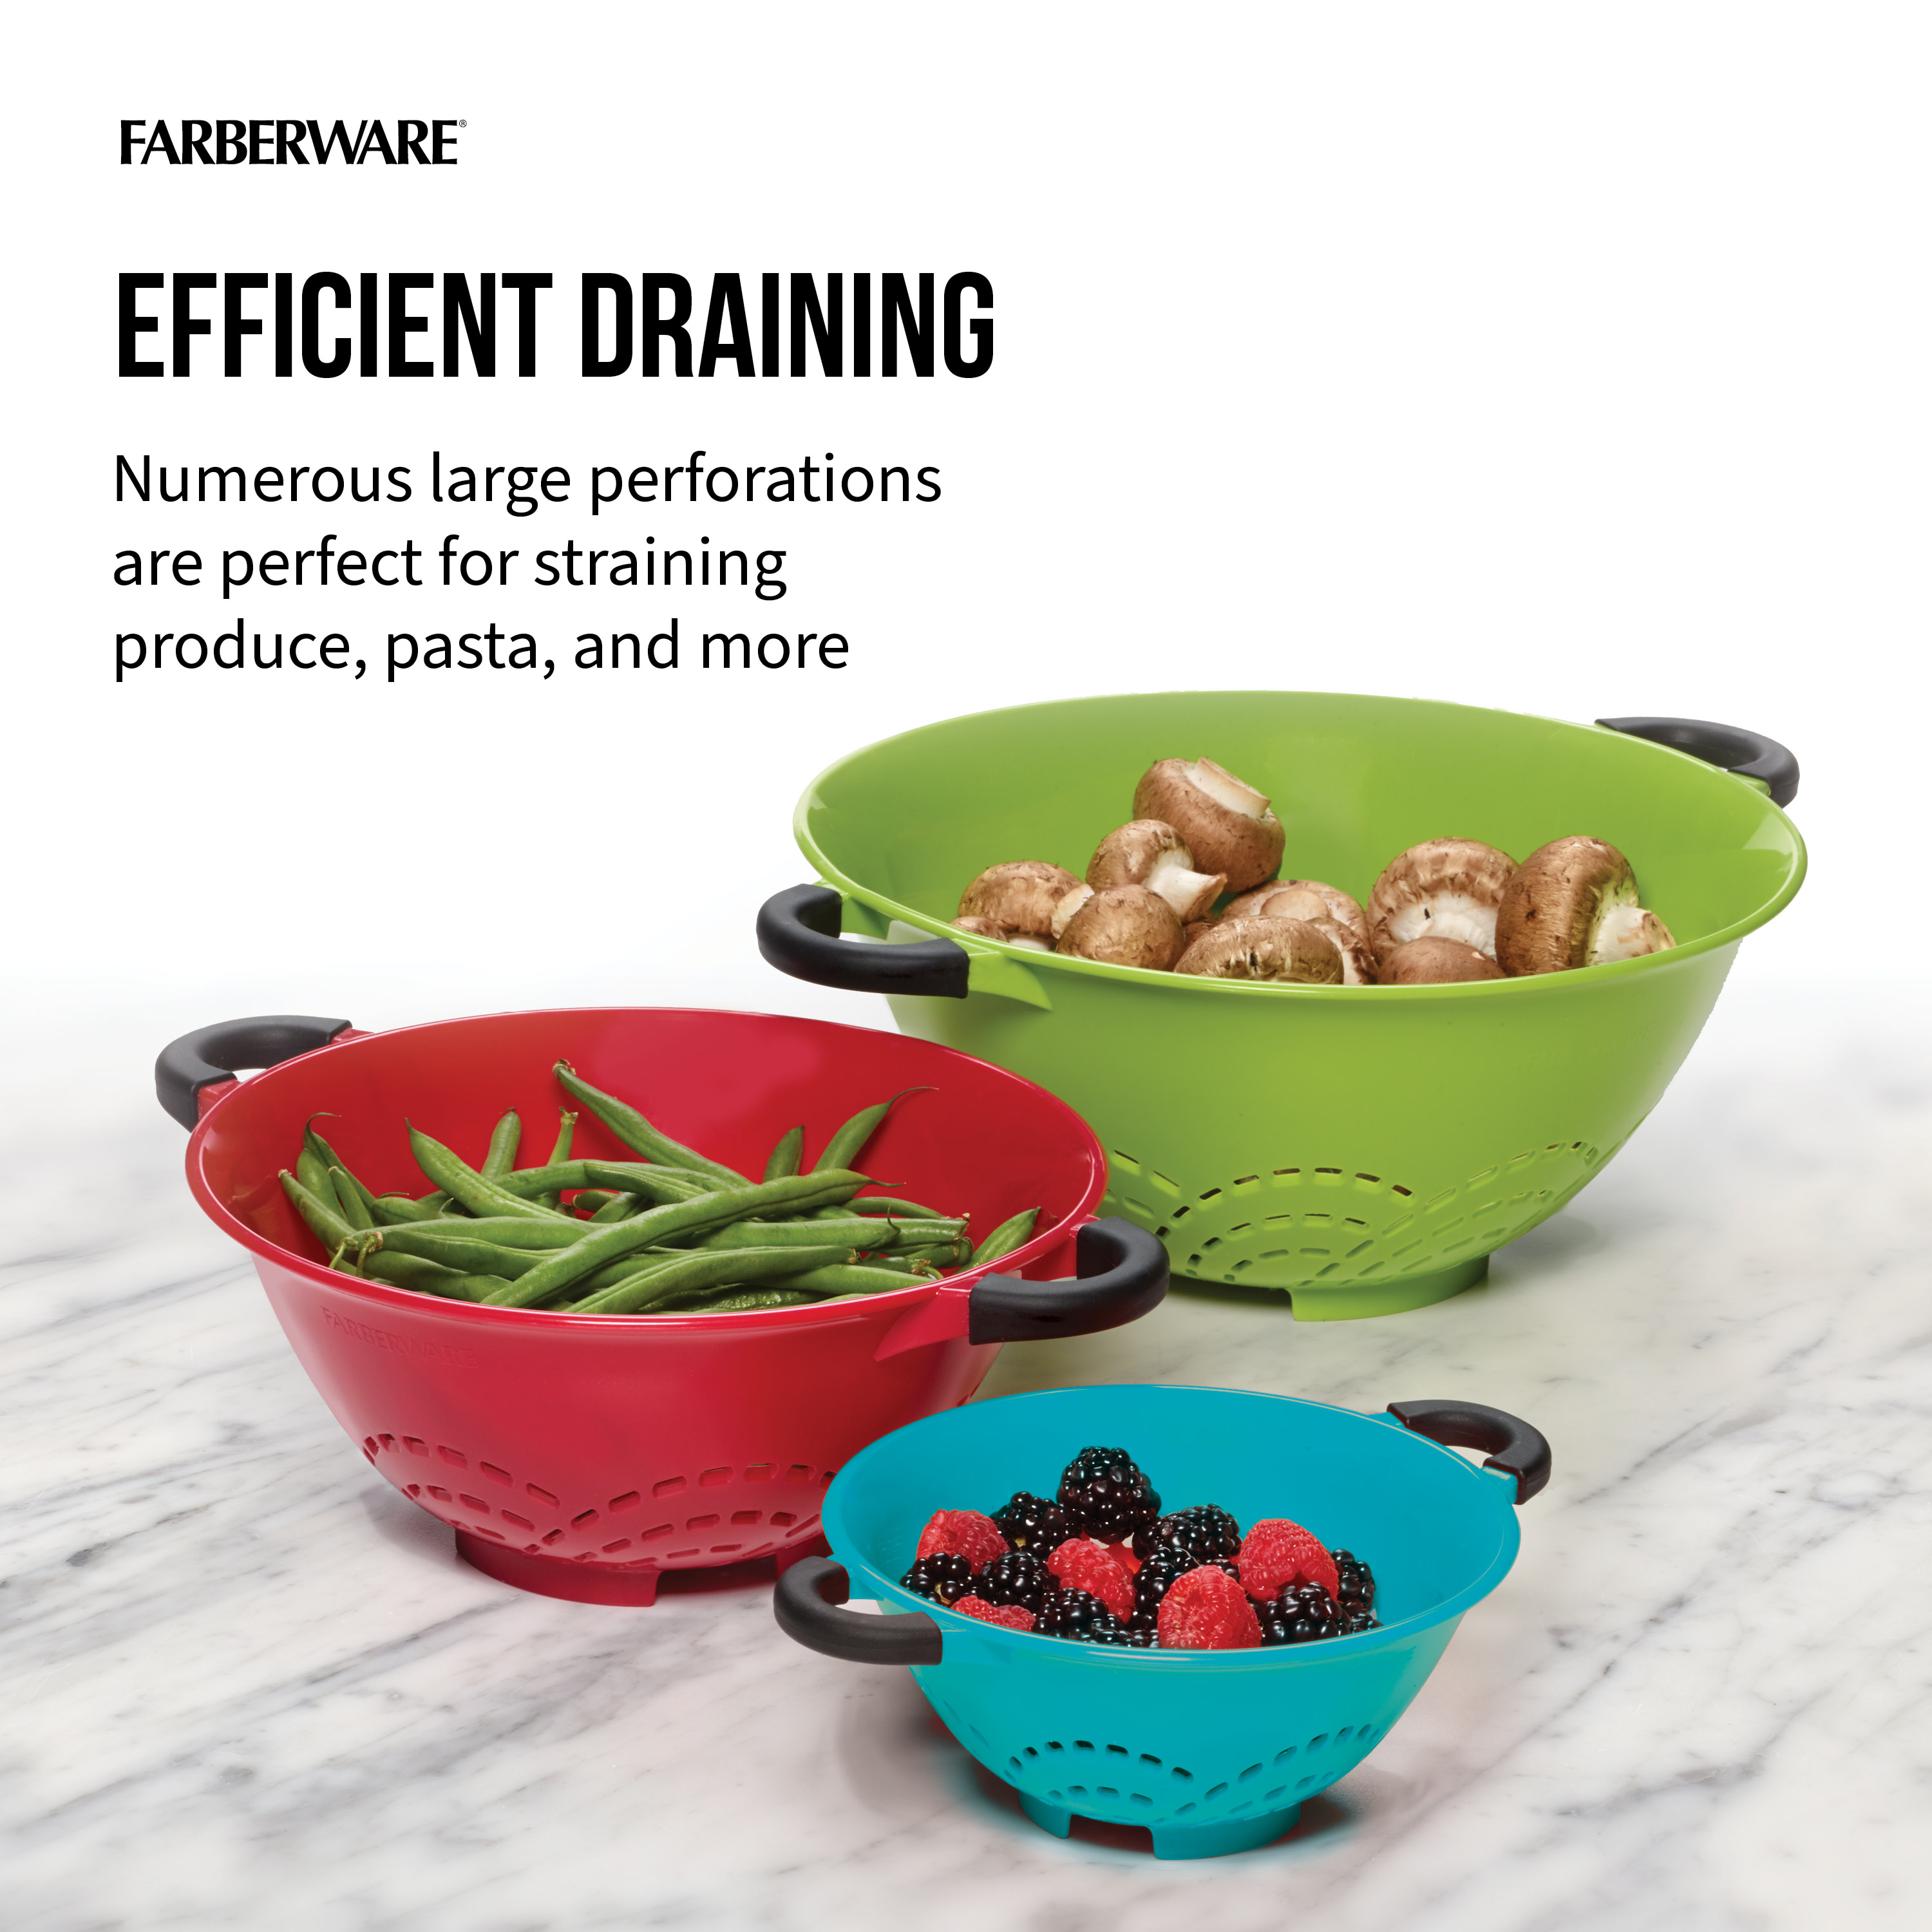 Farberware Professional Soft Grips Set of 3 Strainer Colanders Multi-Color - image 3 of 10